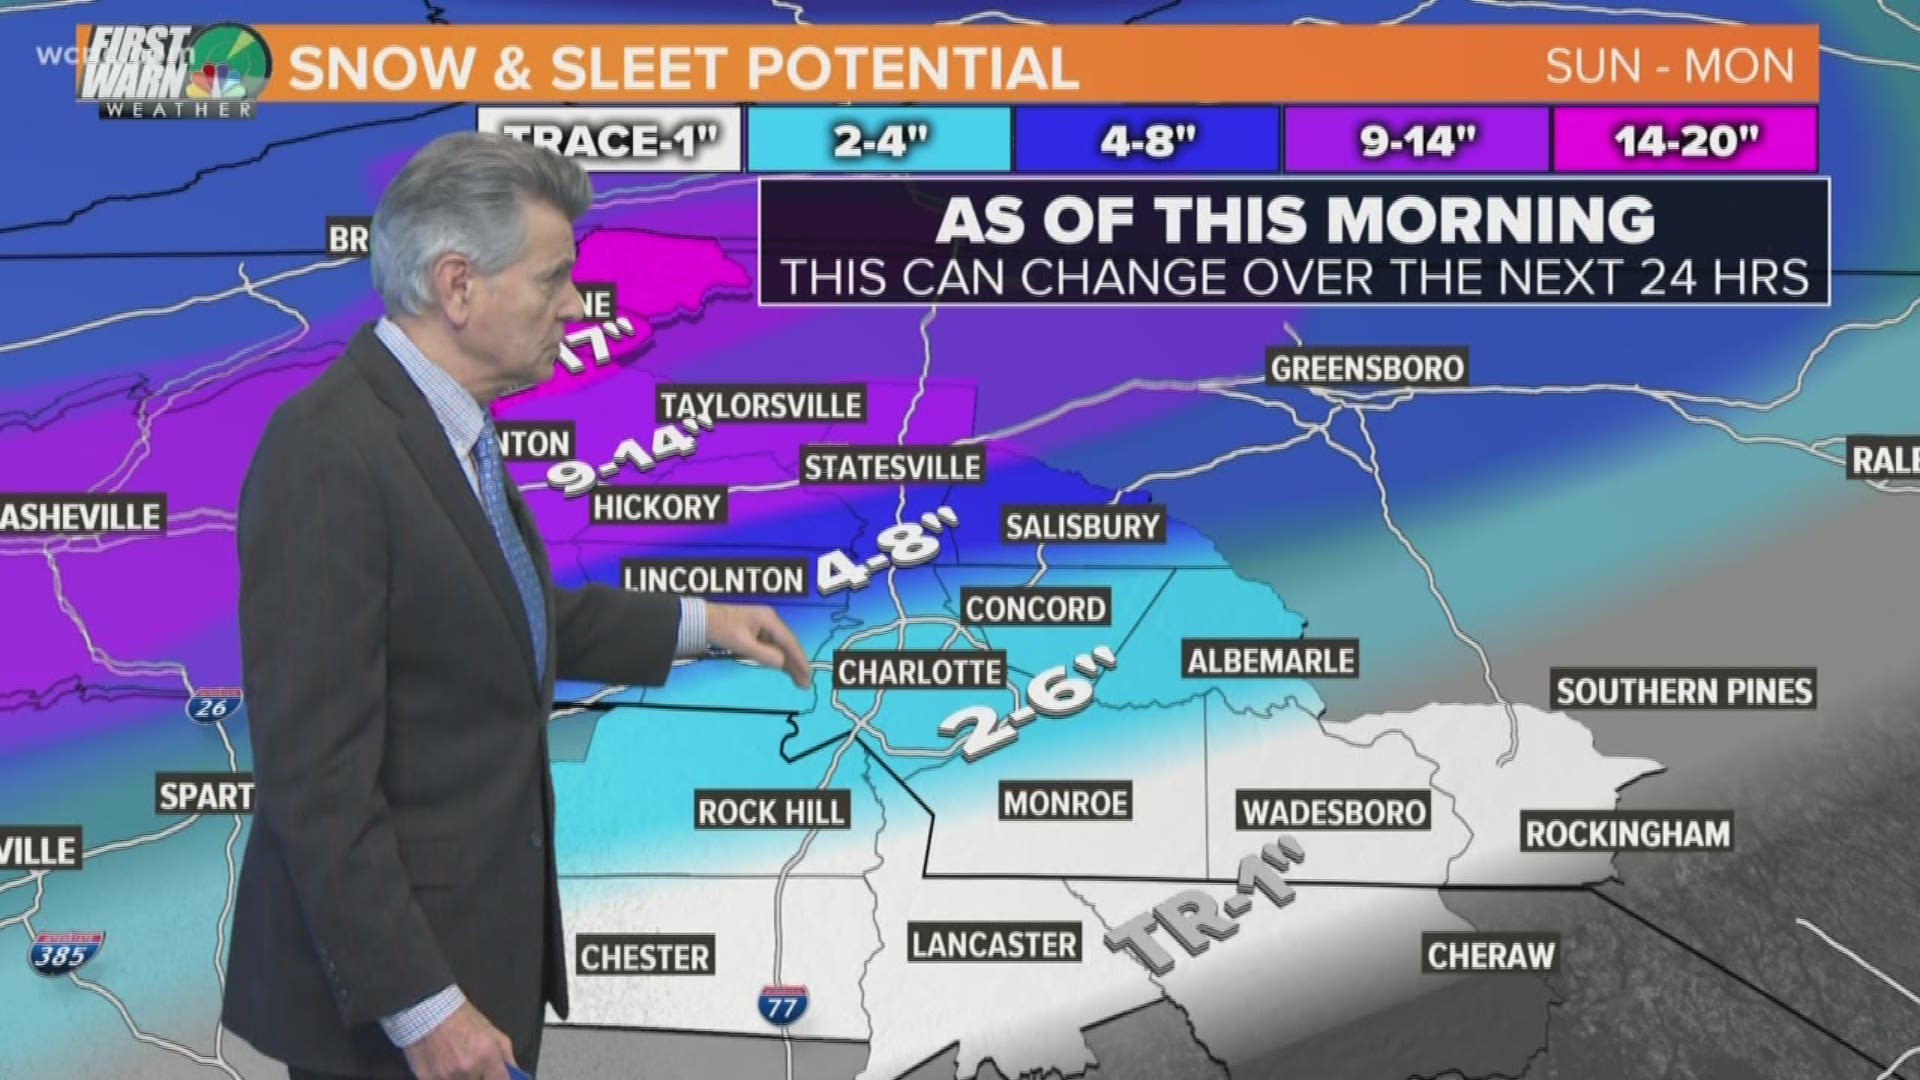 A winter storm is expected to bring heavy snow to the North Carolina mountains while Charlotte could get up to 6 inches of snow and ice accumulations.